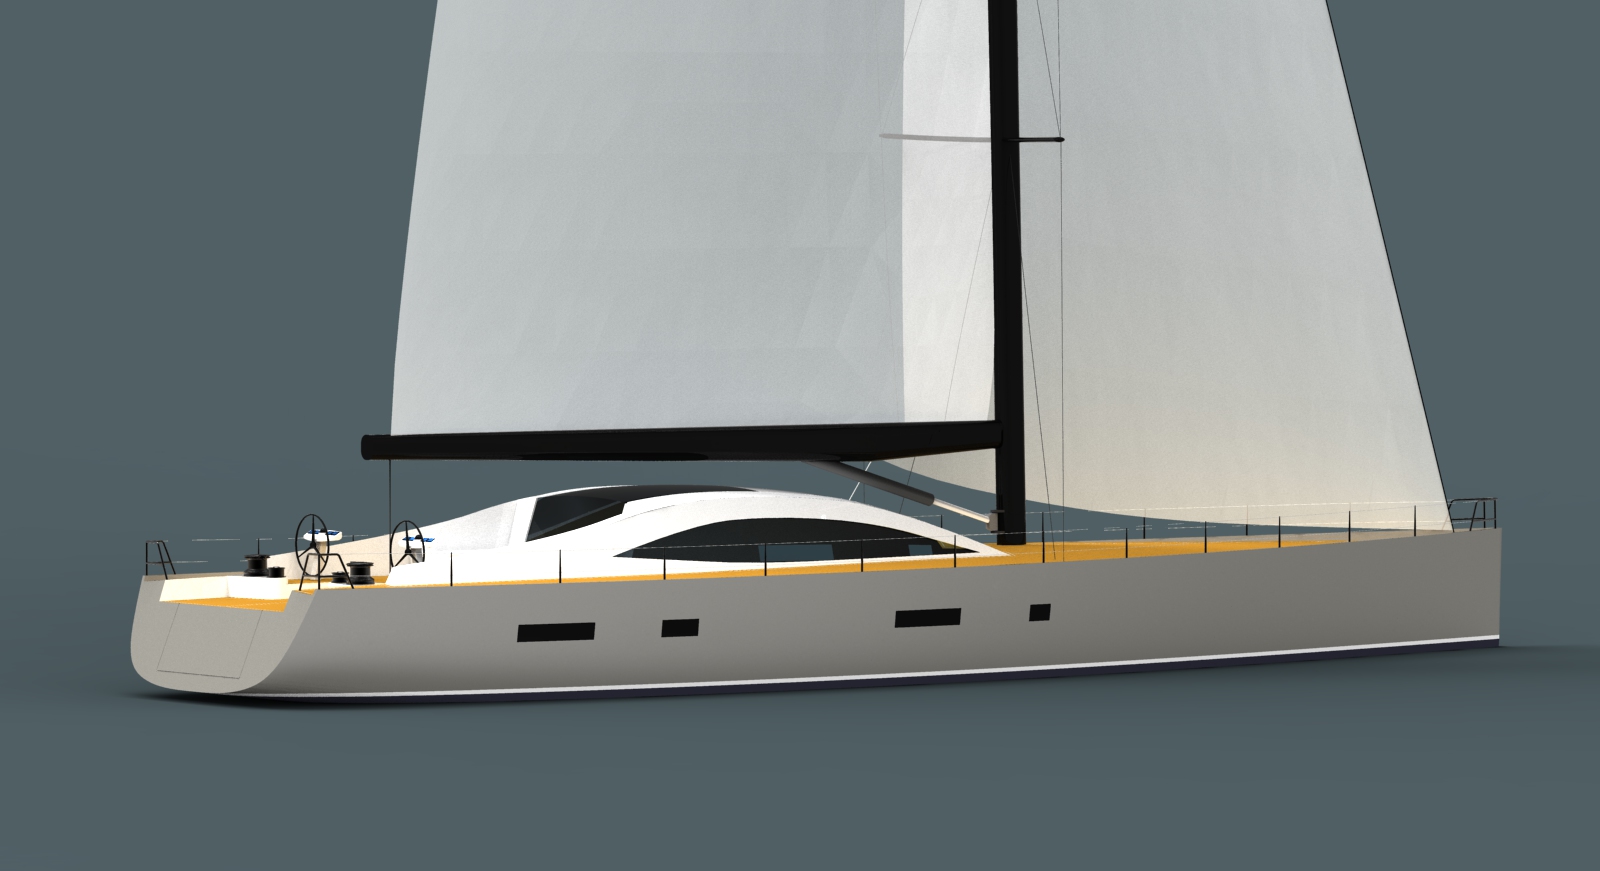 Owen Clarke are designers who deliver fast custom cruising boat, advanced sailboat and superyacht design with style and reliability derived from our offshore and ocean racing background. This 30m blue water cruising design is at the upper end of what is considered a cruising yacht, and at the lower end in terms of size for a superyacht.